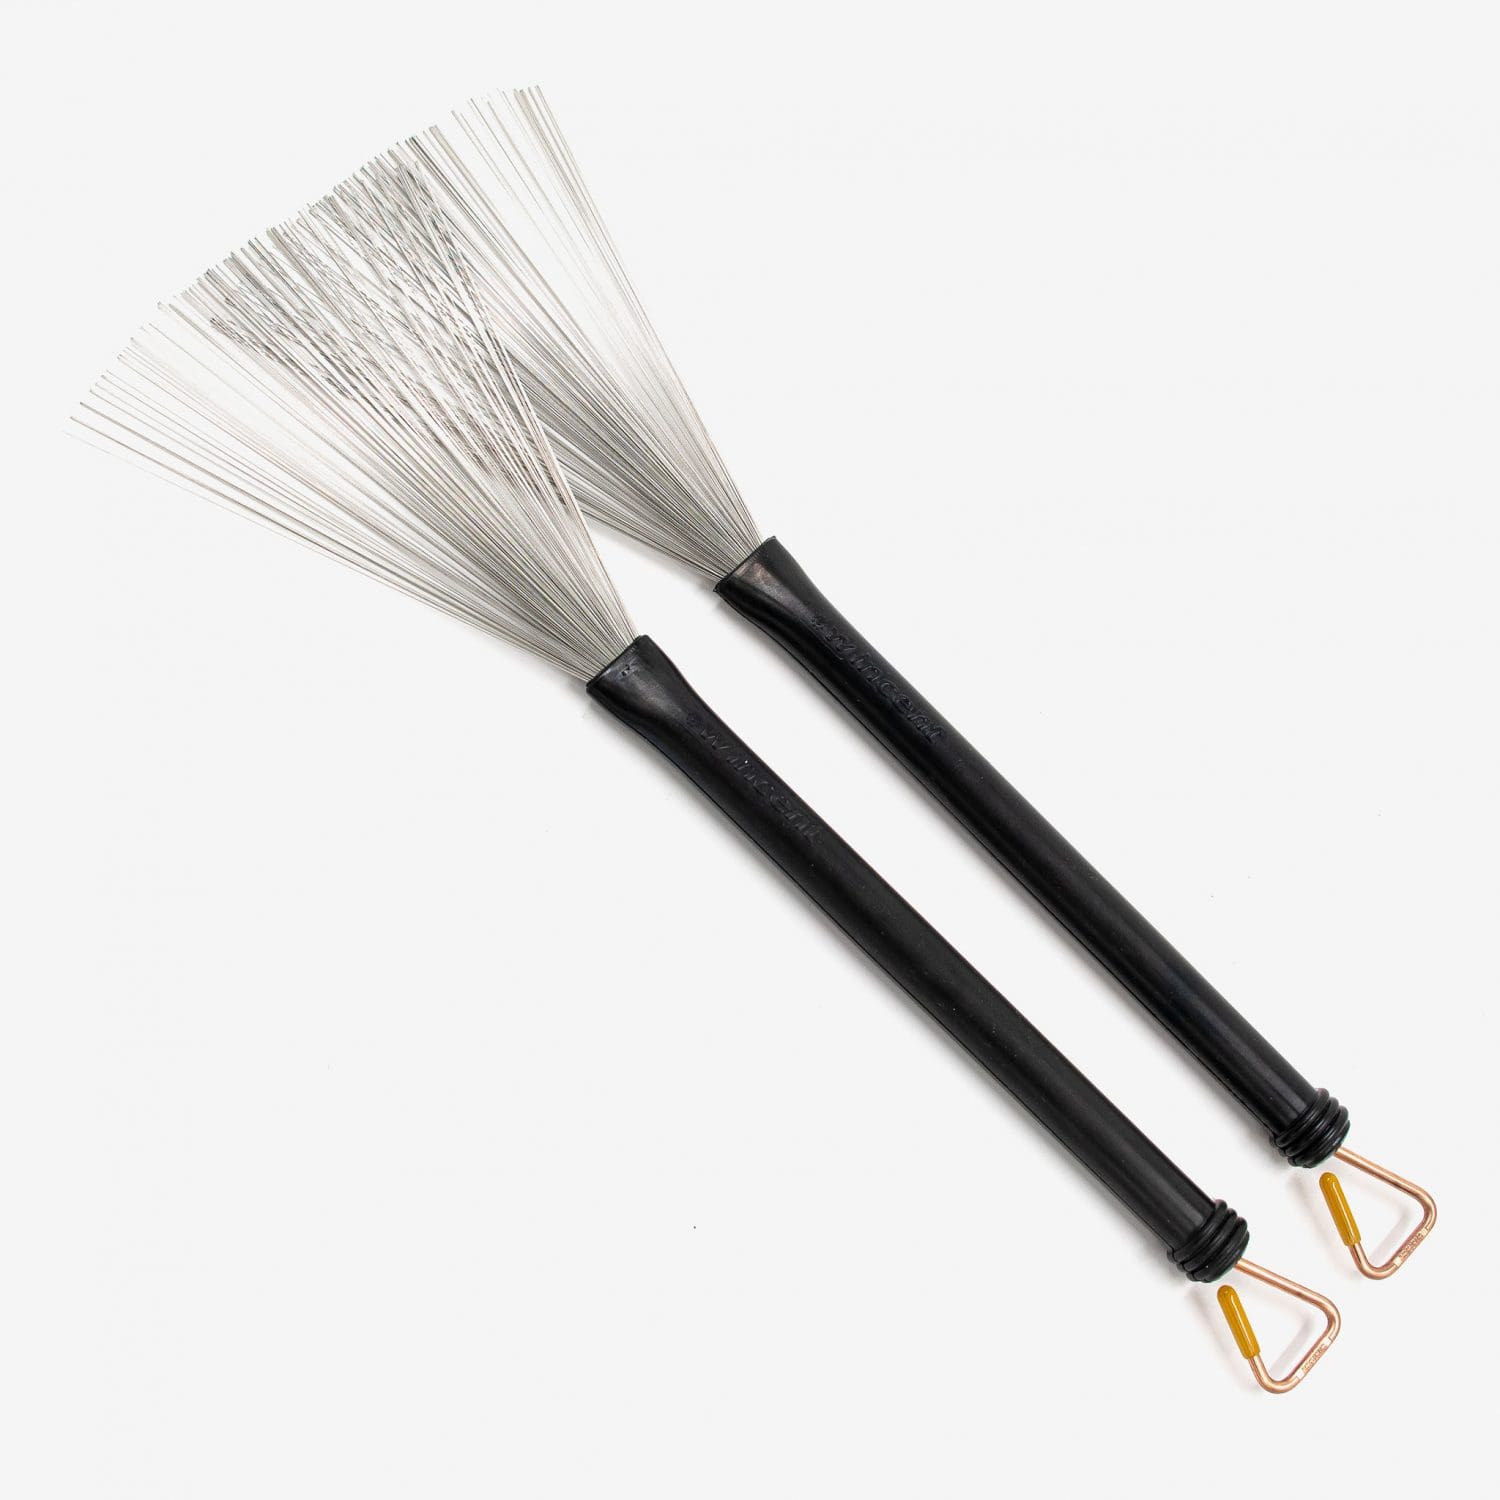 Retractable Wire Brushes